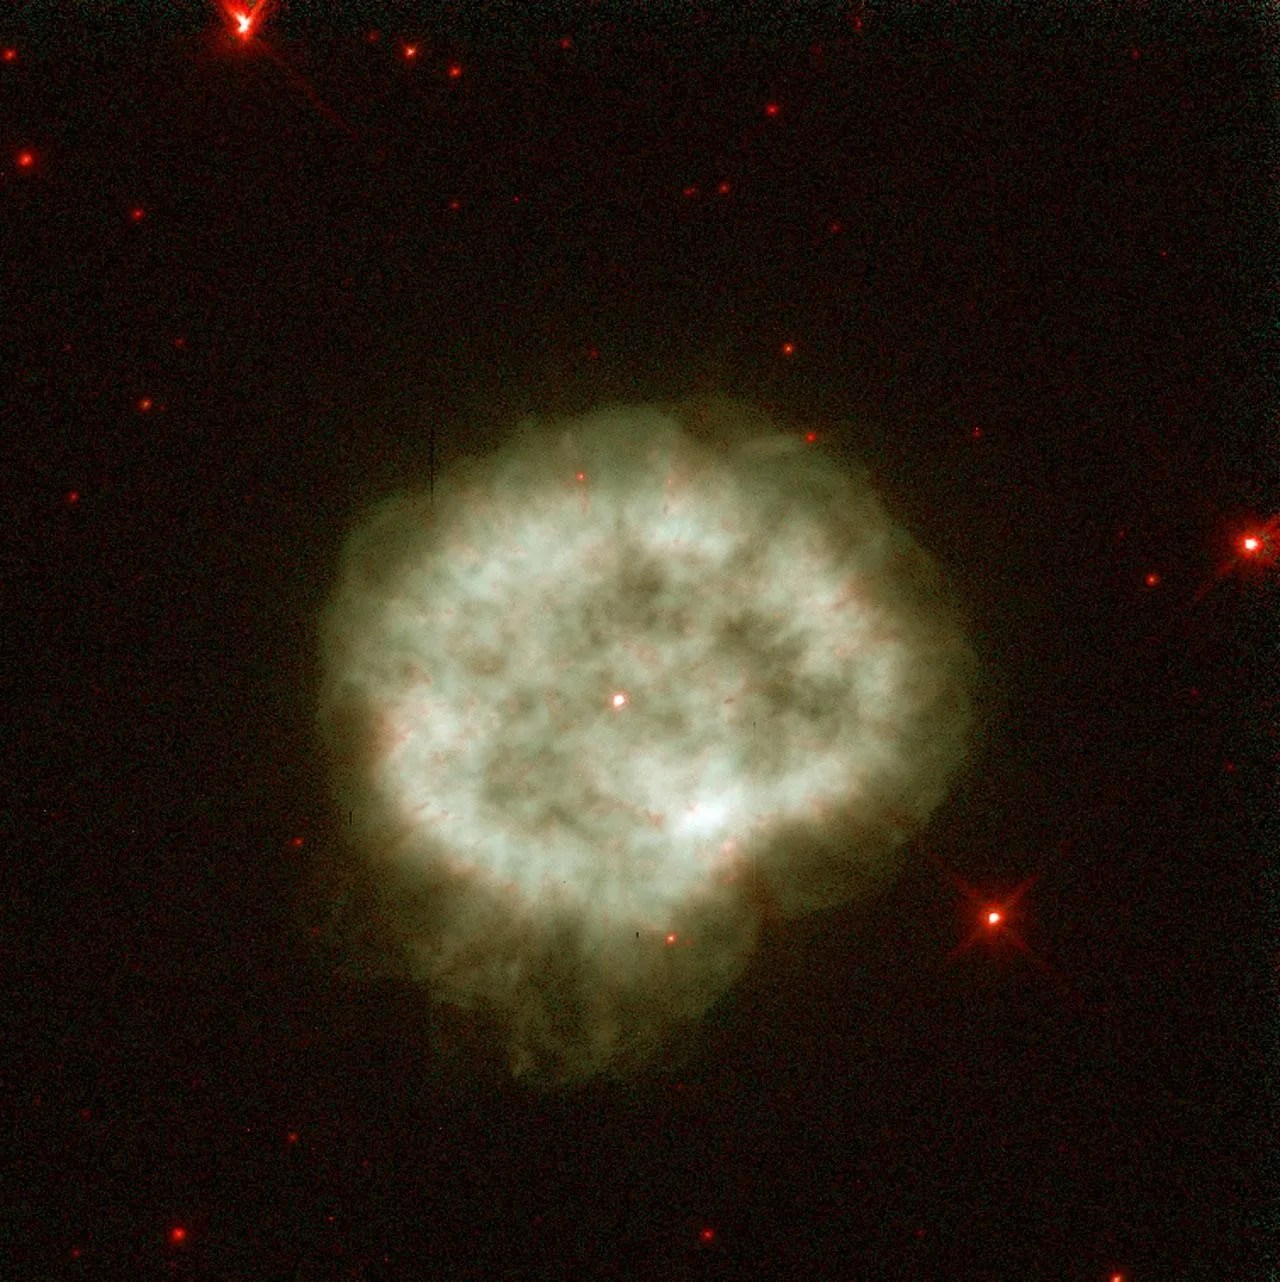 A cloud of white-gray gas with a star at its center, with a scattering of small red stars around it.